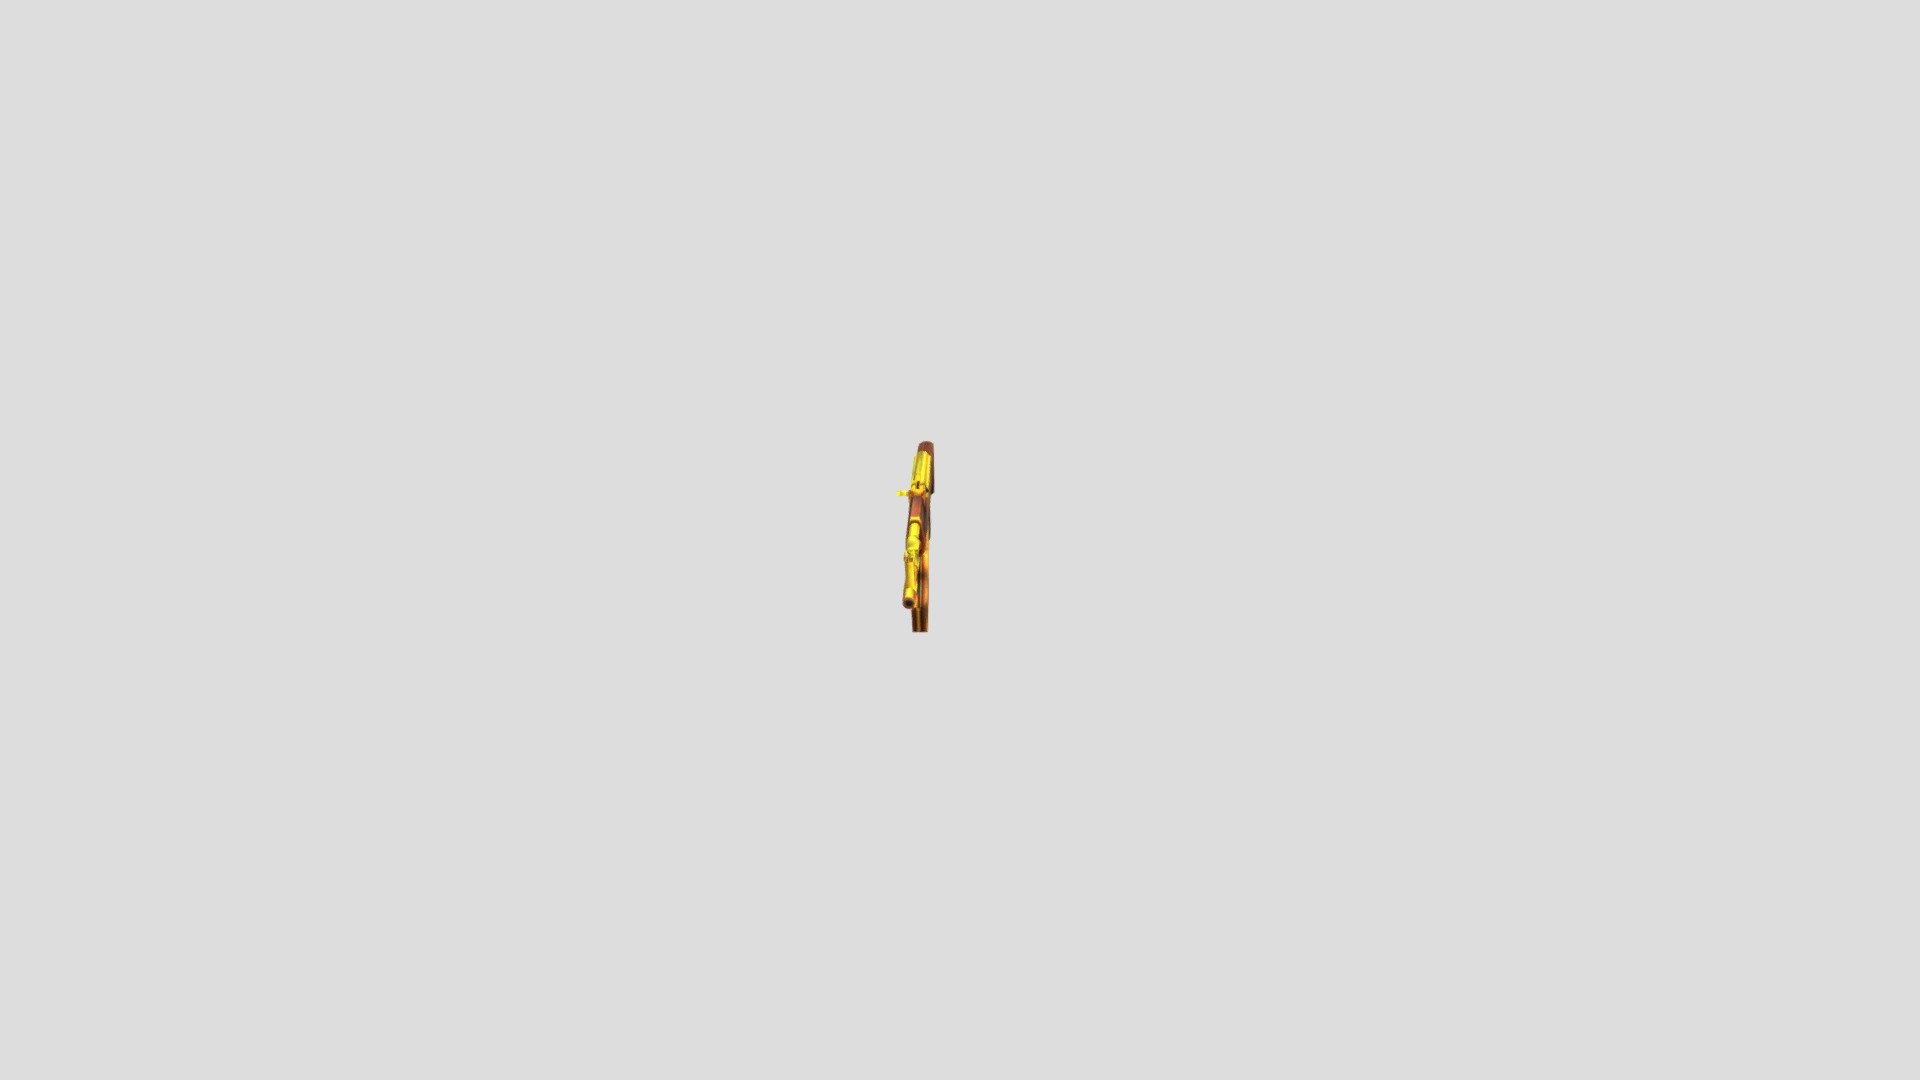 This is an extracted PV model of the AK47 with the gold texture. It is not made available for download as I do not own the rights to the model. Just uploading for reference in my GMOD addon 3d model